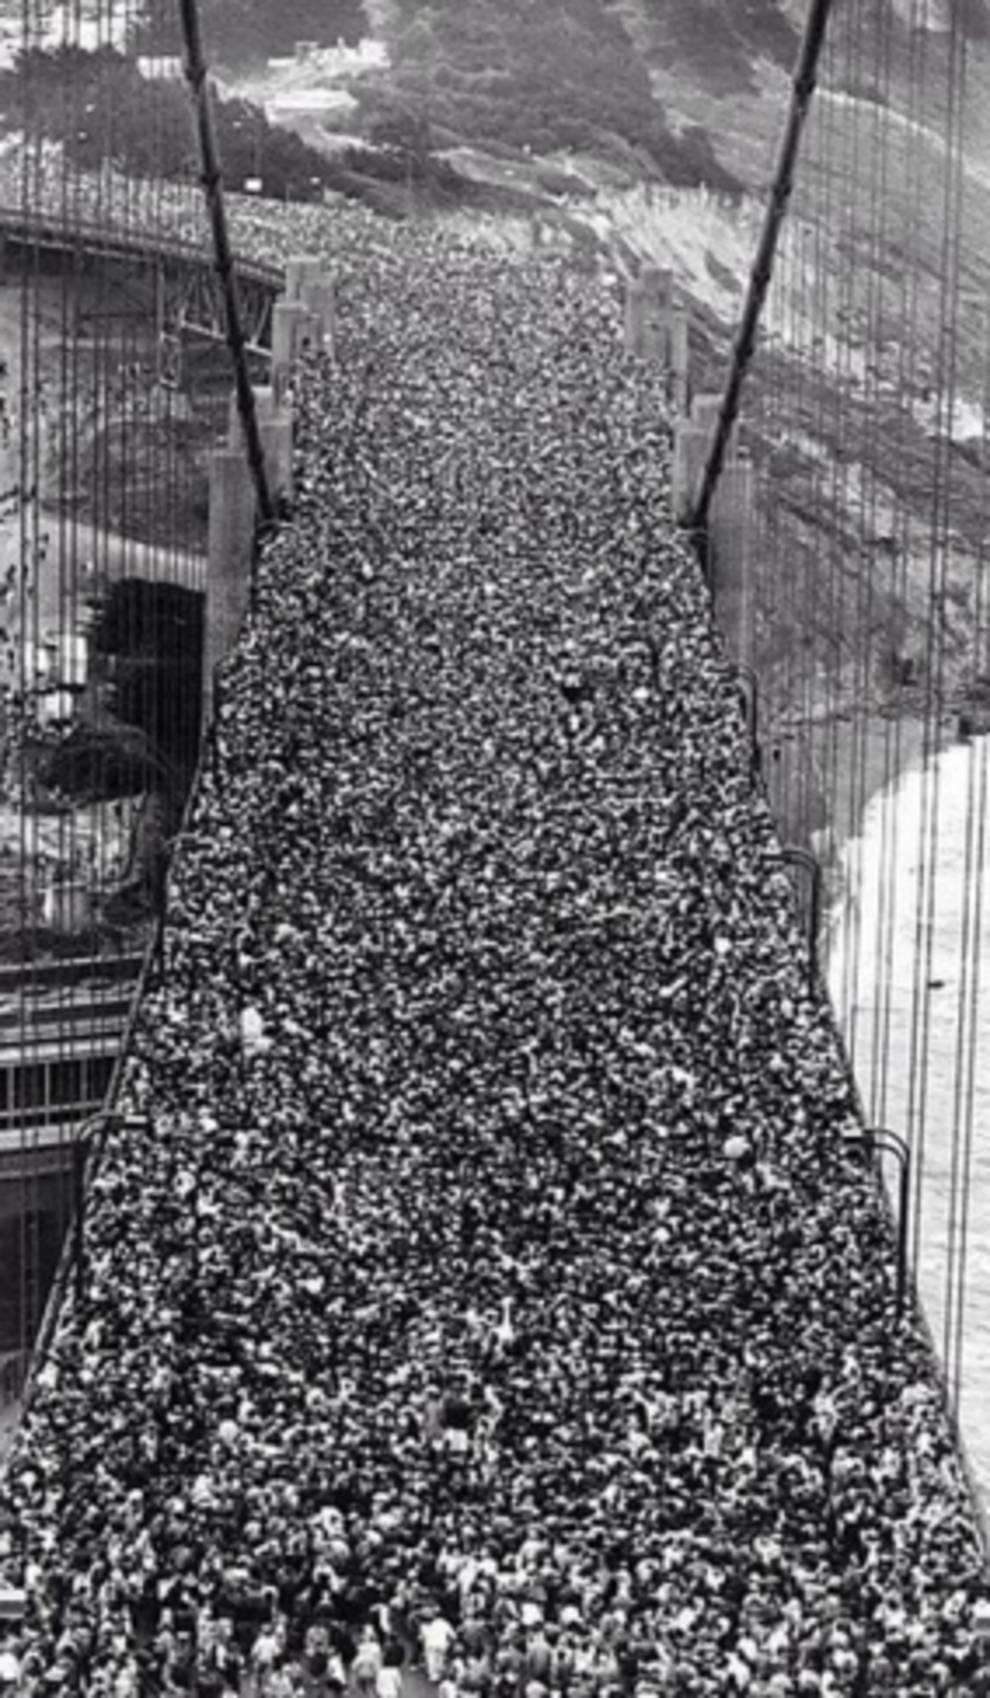 On the opening day, almost 200,000 people crossed the bridge